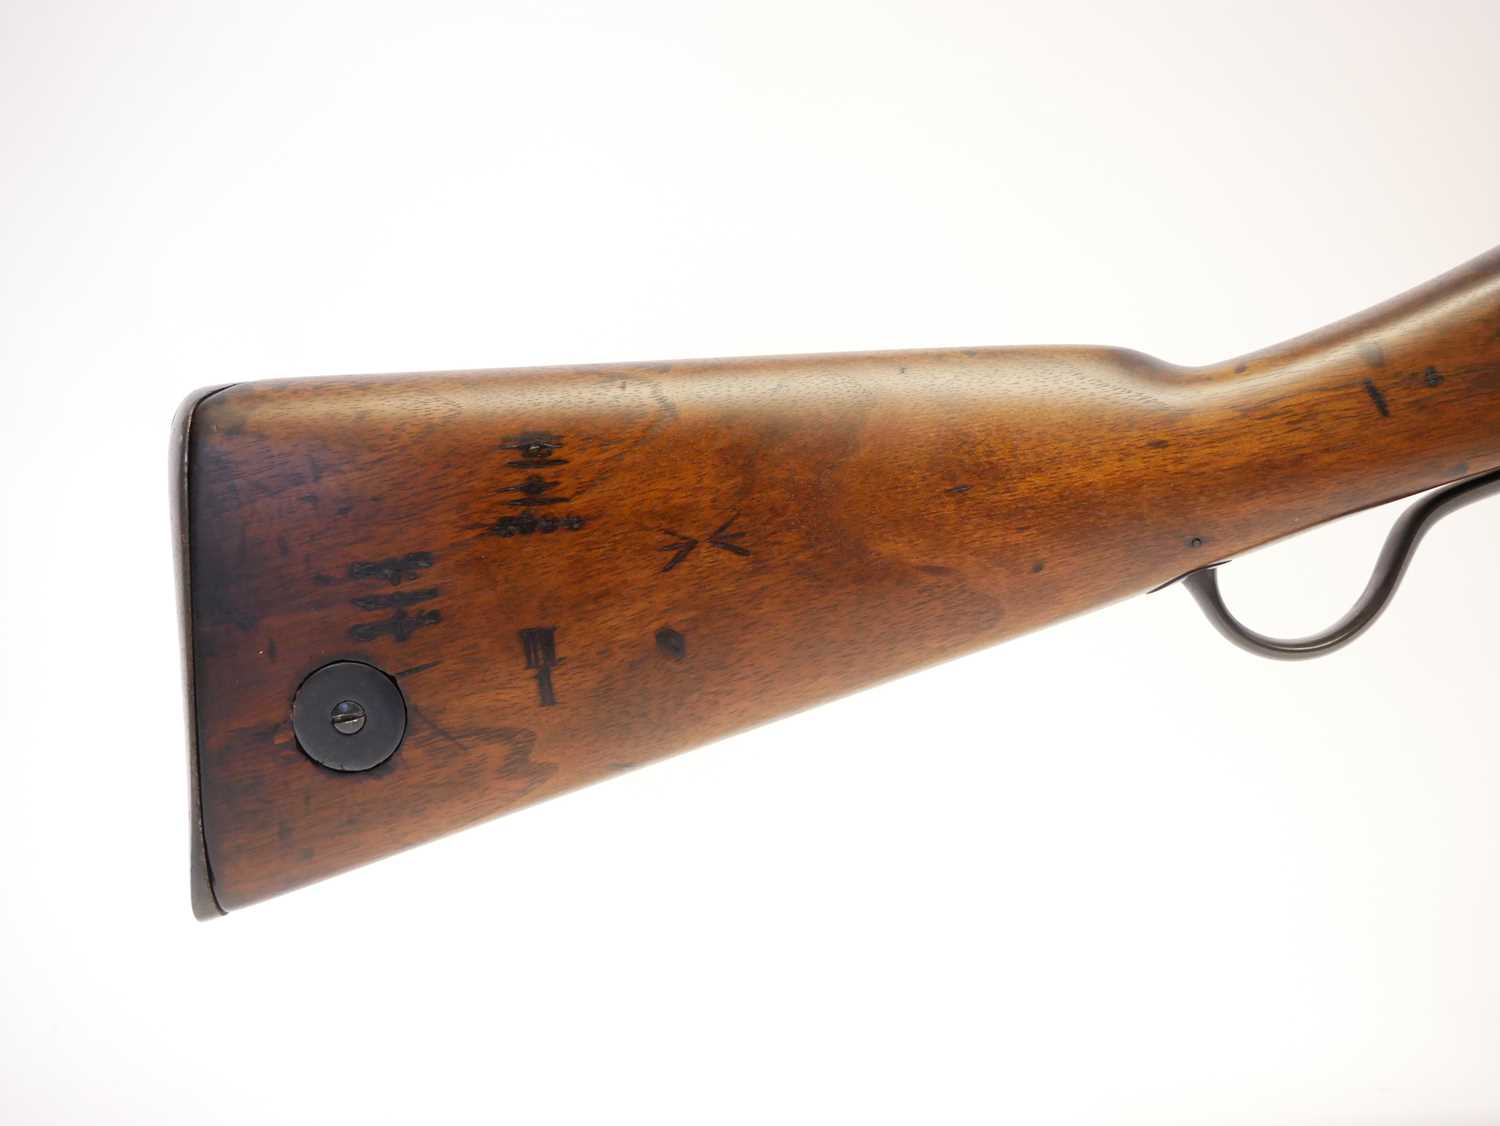 Enfield Martini Henry 577/450 Cavalry Carbine IC1, with 20.5 inch barrel (saw cut to the breech) - Image 3 of 18